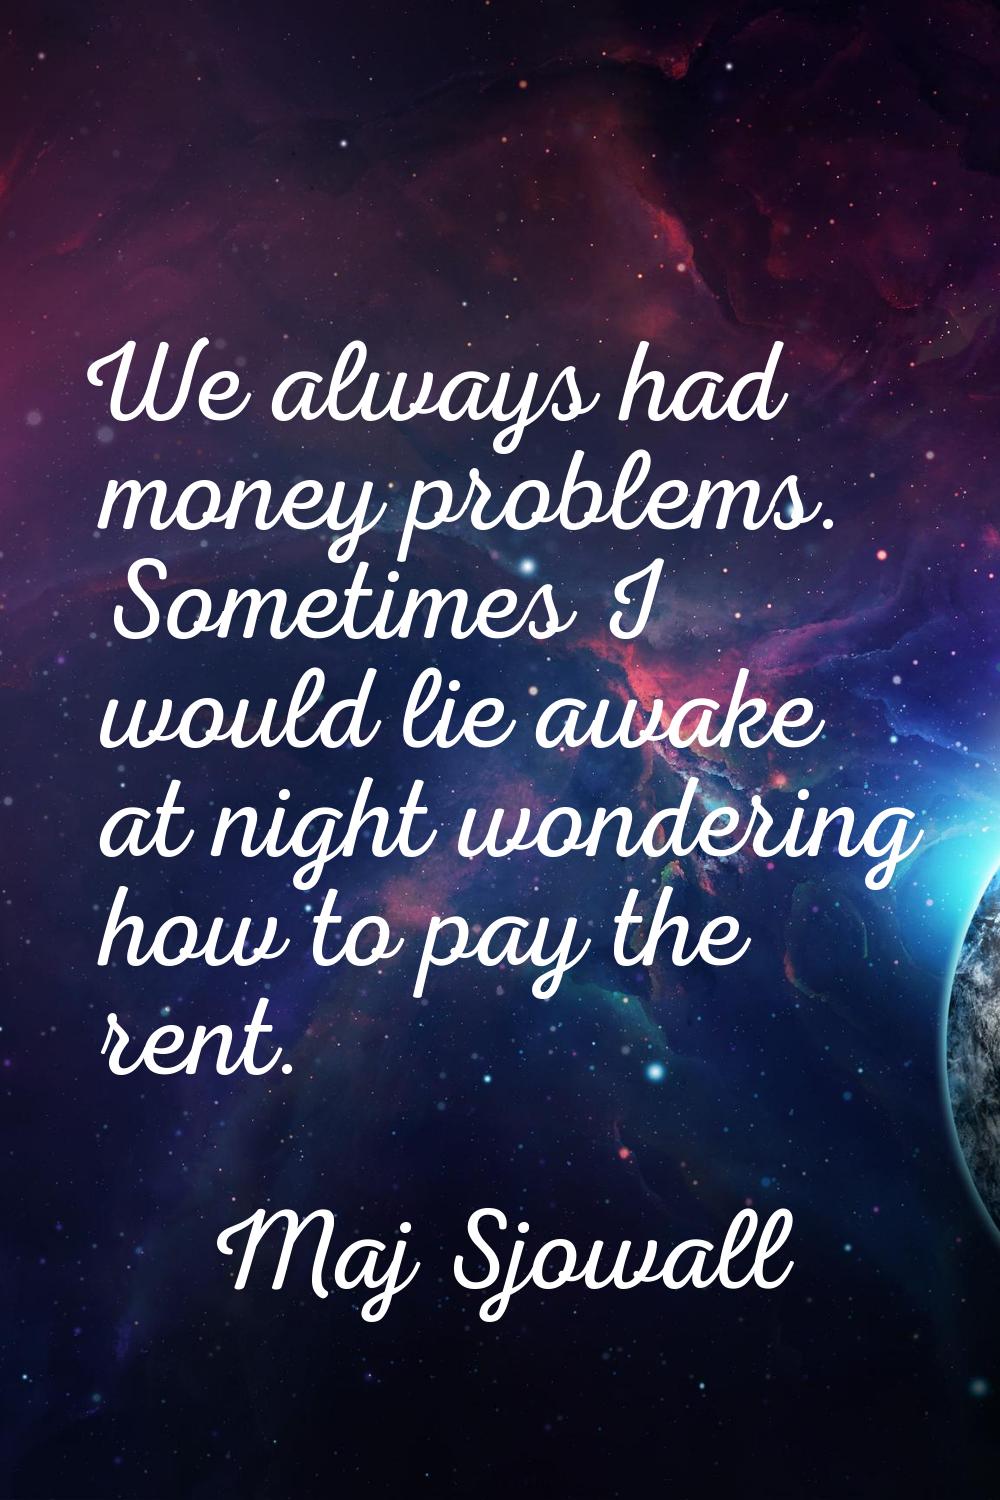 We always had money problems. Sometimes I would lie awake at night wondering how to pay the rent.